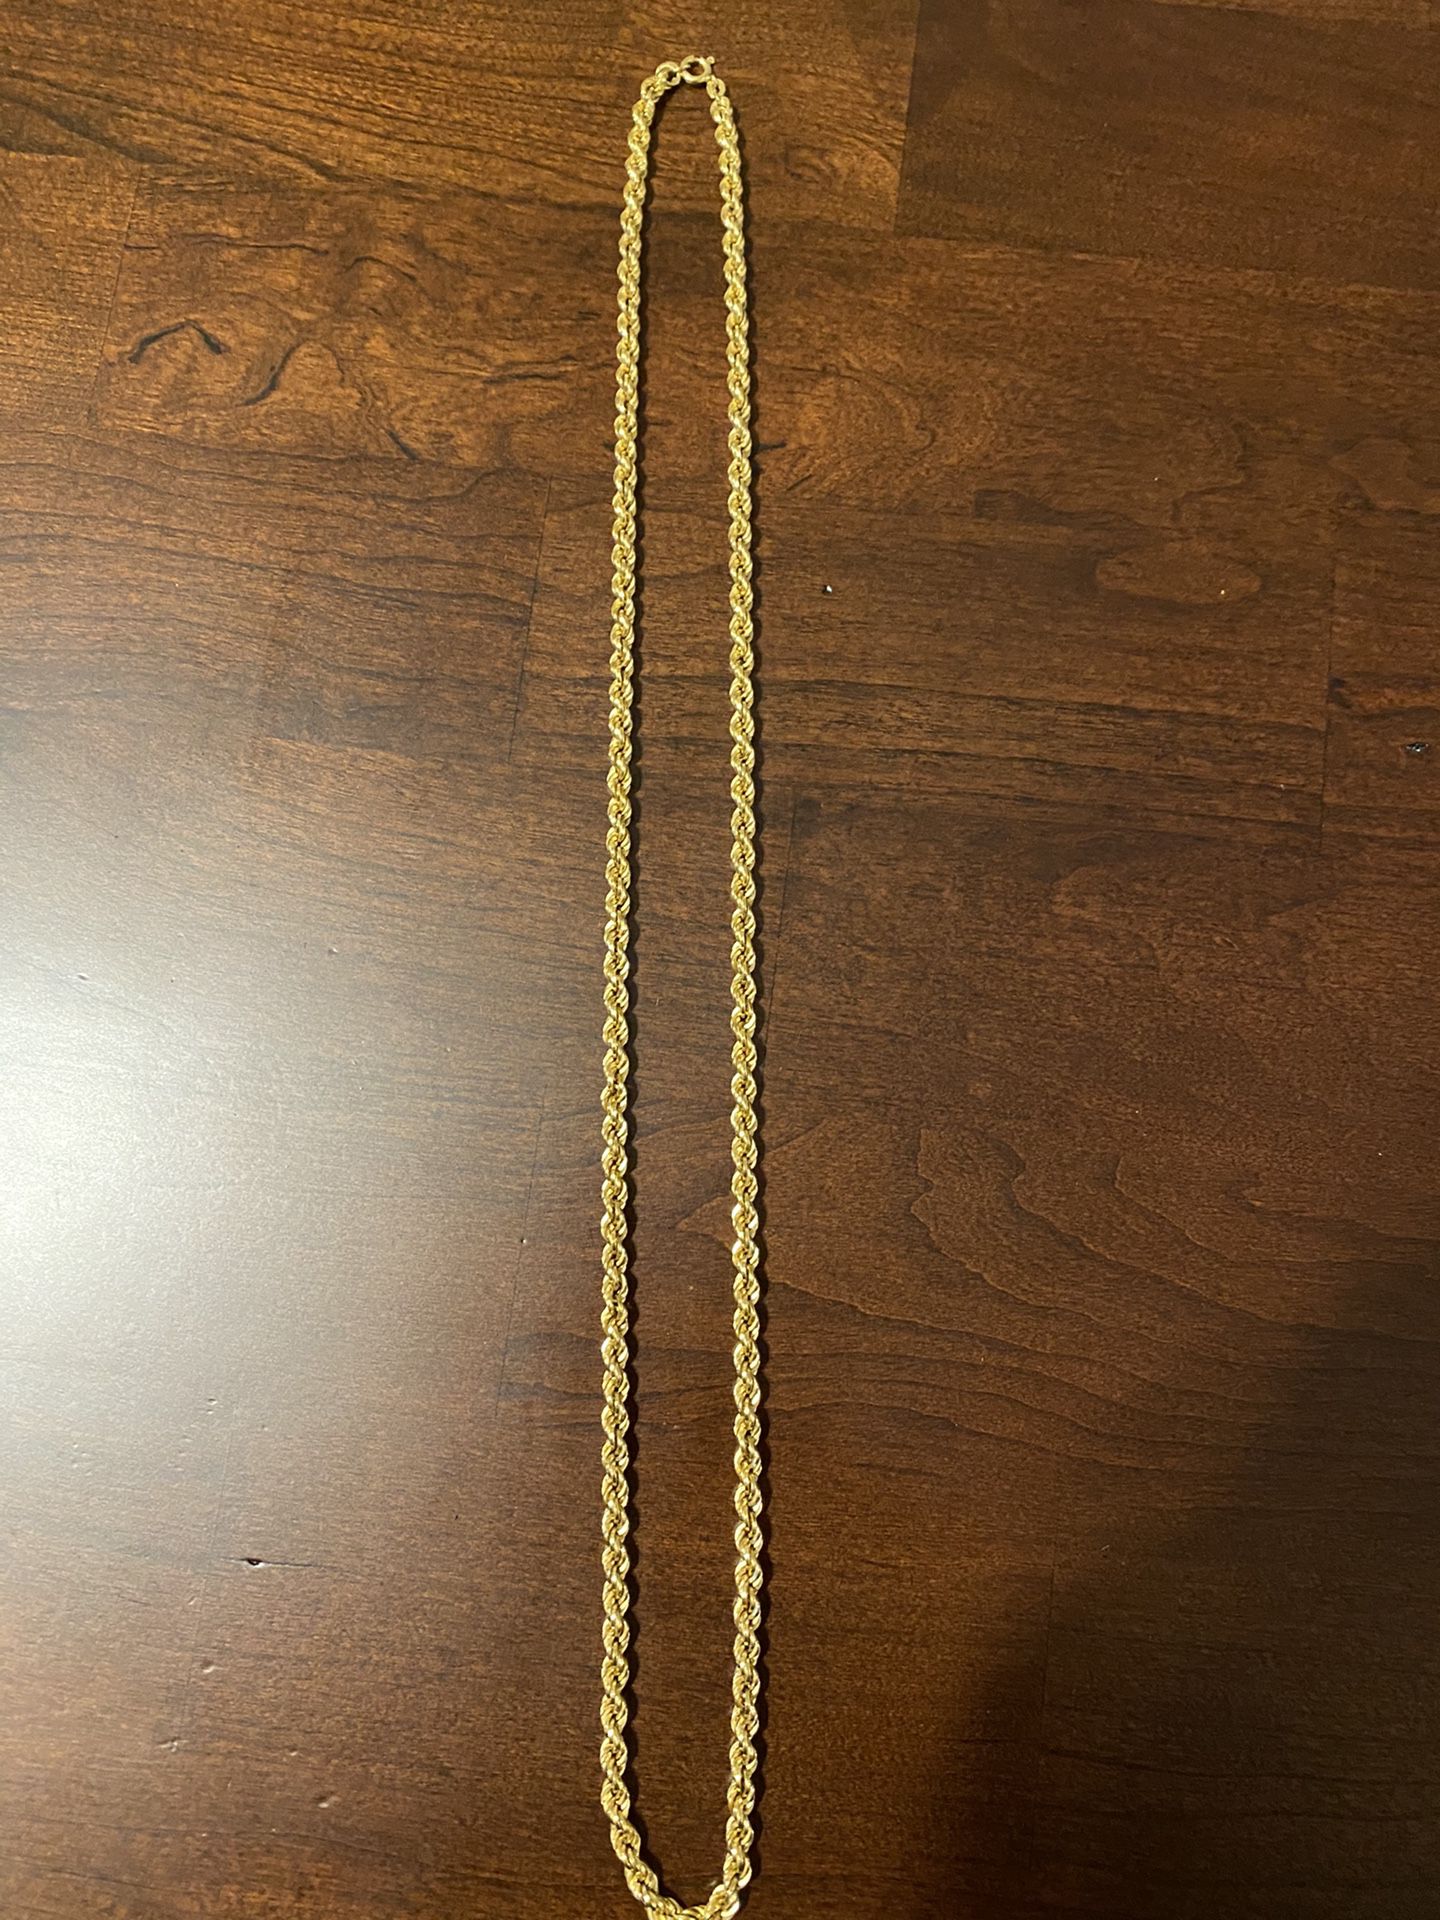 18k gold rope chain